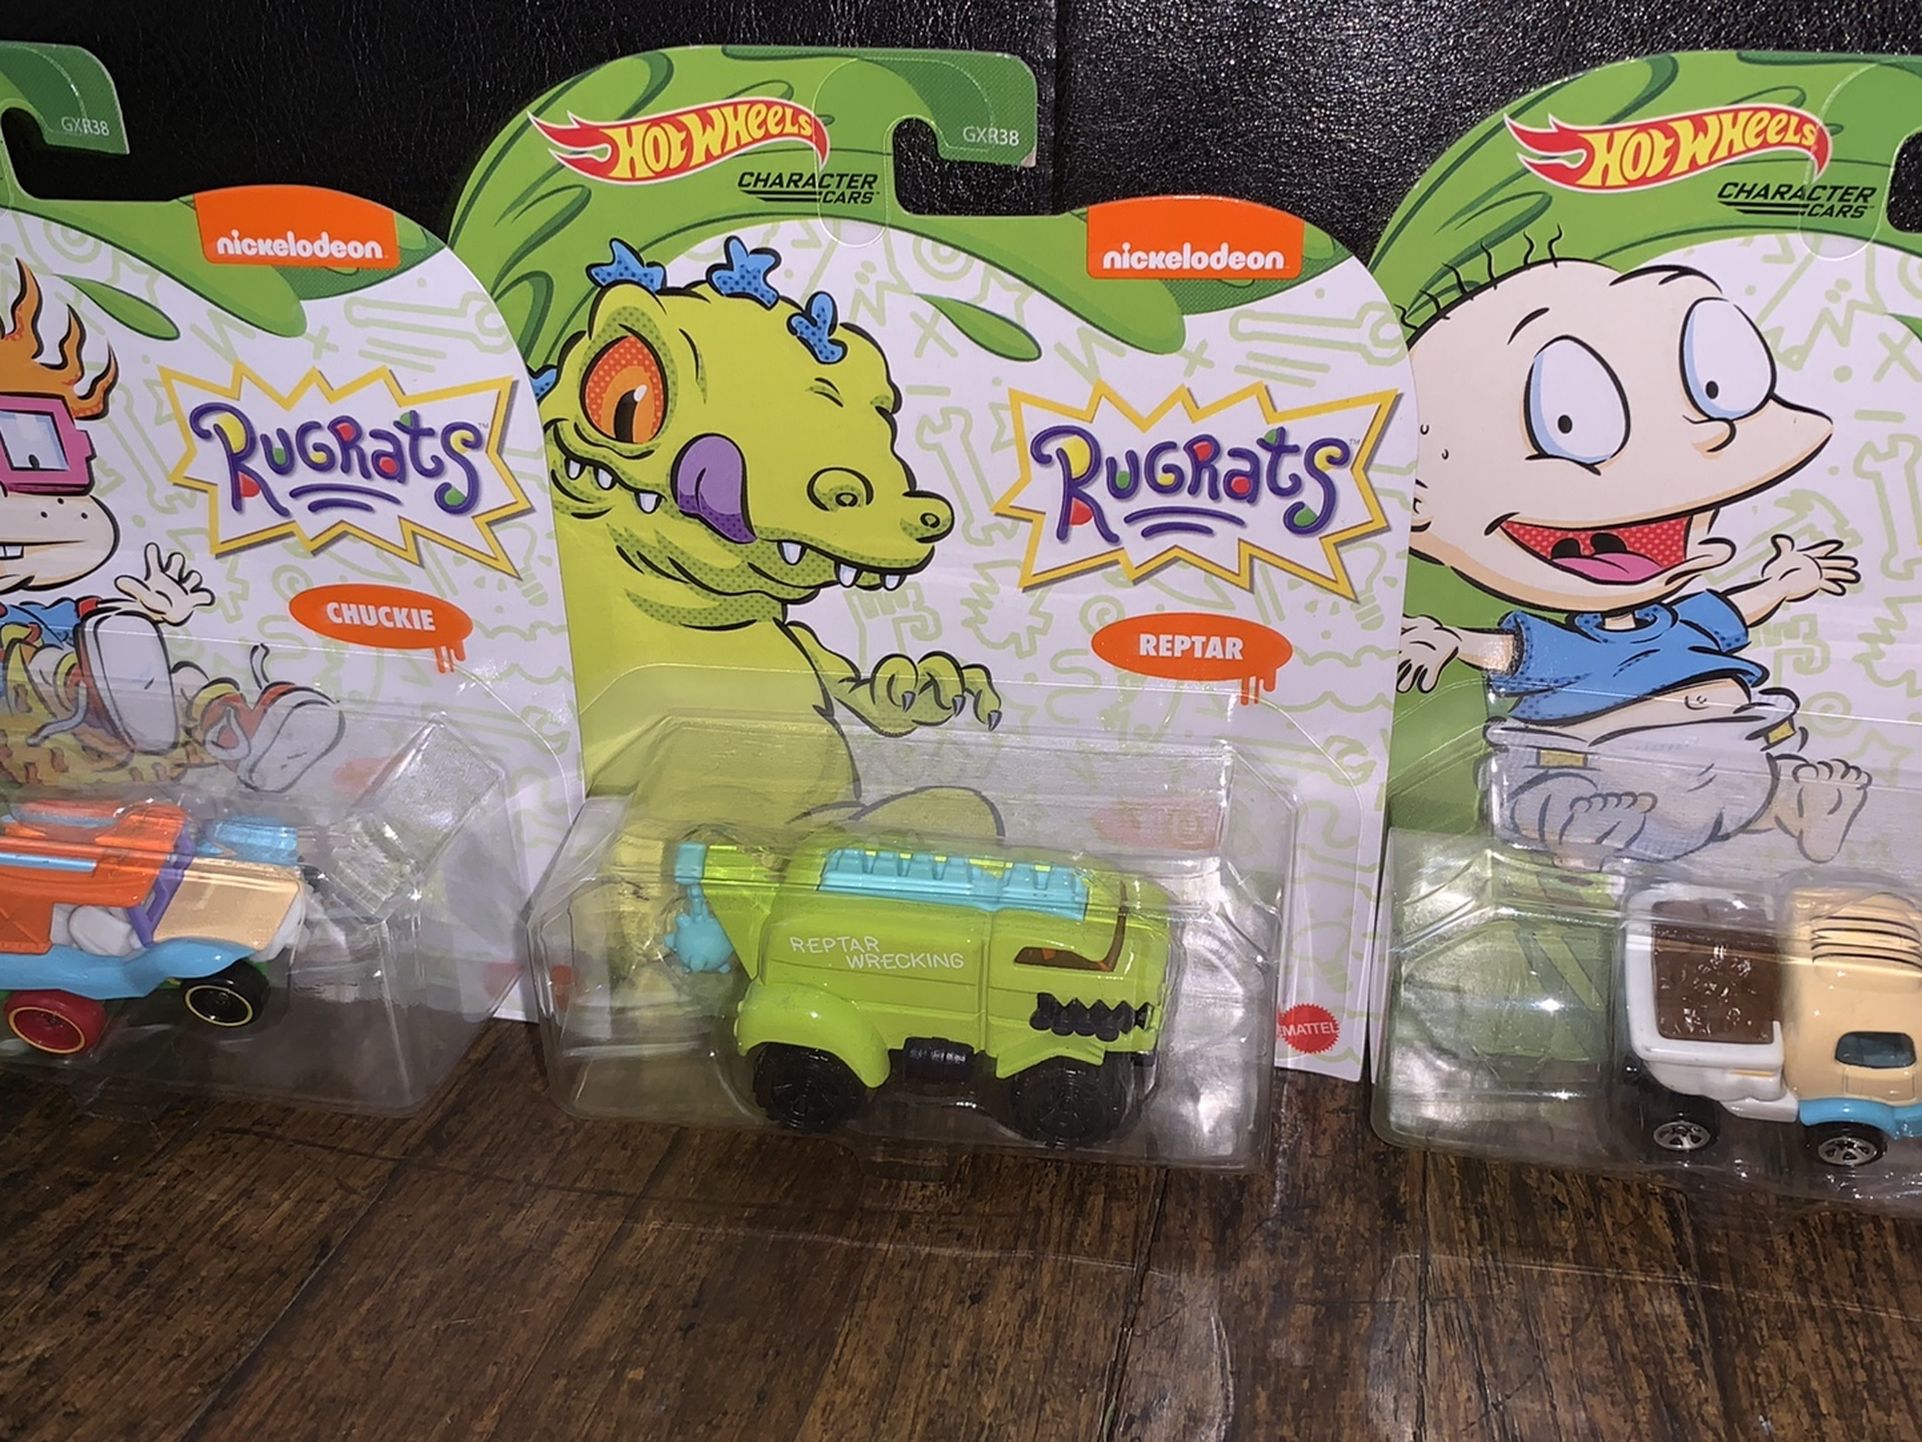 Entire Rugrats Hot Wheel Collection